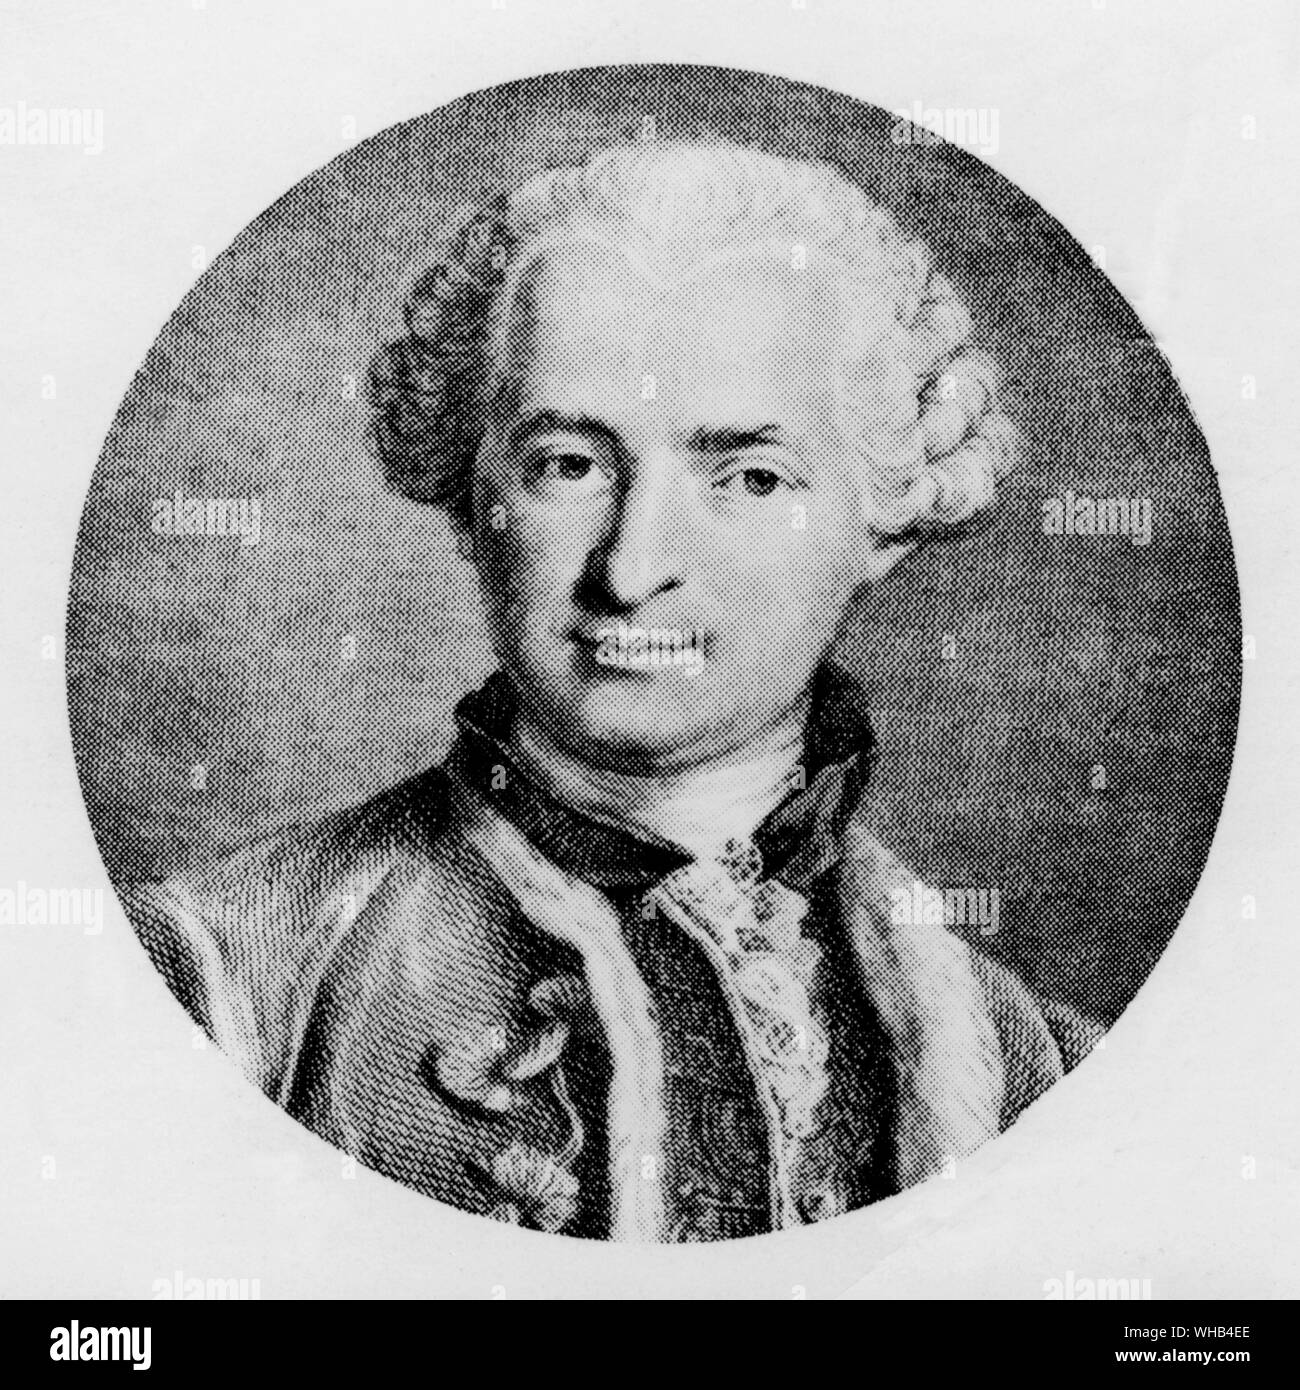 The Comte de St. Germain by N. Thomas claimed to have discovered the Elixir of Life.. The Count of St. Germain (fl. 1710-1784) has been variously described as a courtier, adventurer, charlatan, inventor, alchemist, pianist, violinist and amateur composer, but is best known as a recurring figure in the stories of several strands of occultism - particularly those connected to Theosophy. Some sources claim that his name is not familial, but was invented by him as a French version of the Latin Sanctus Germanus, meaning Holy Brother.. Stock Photo